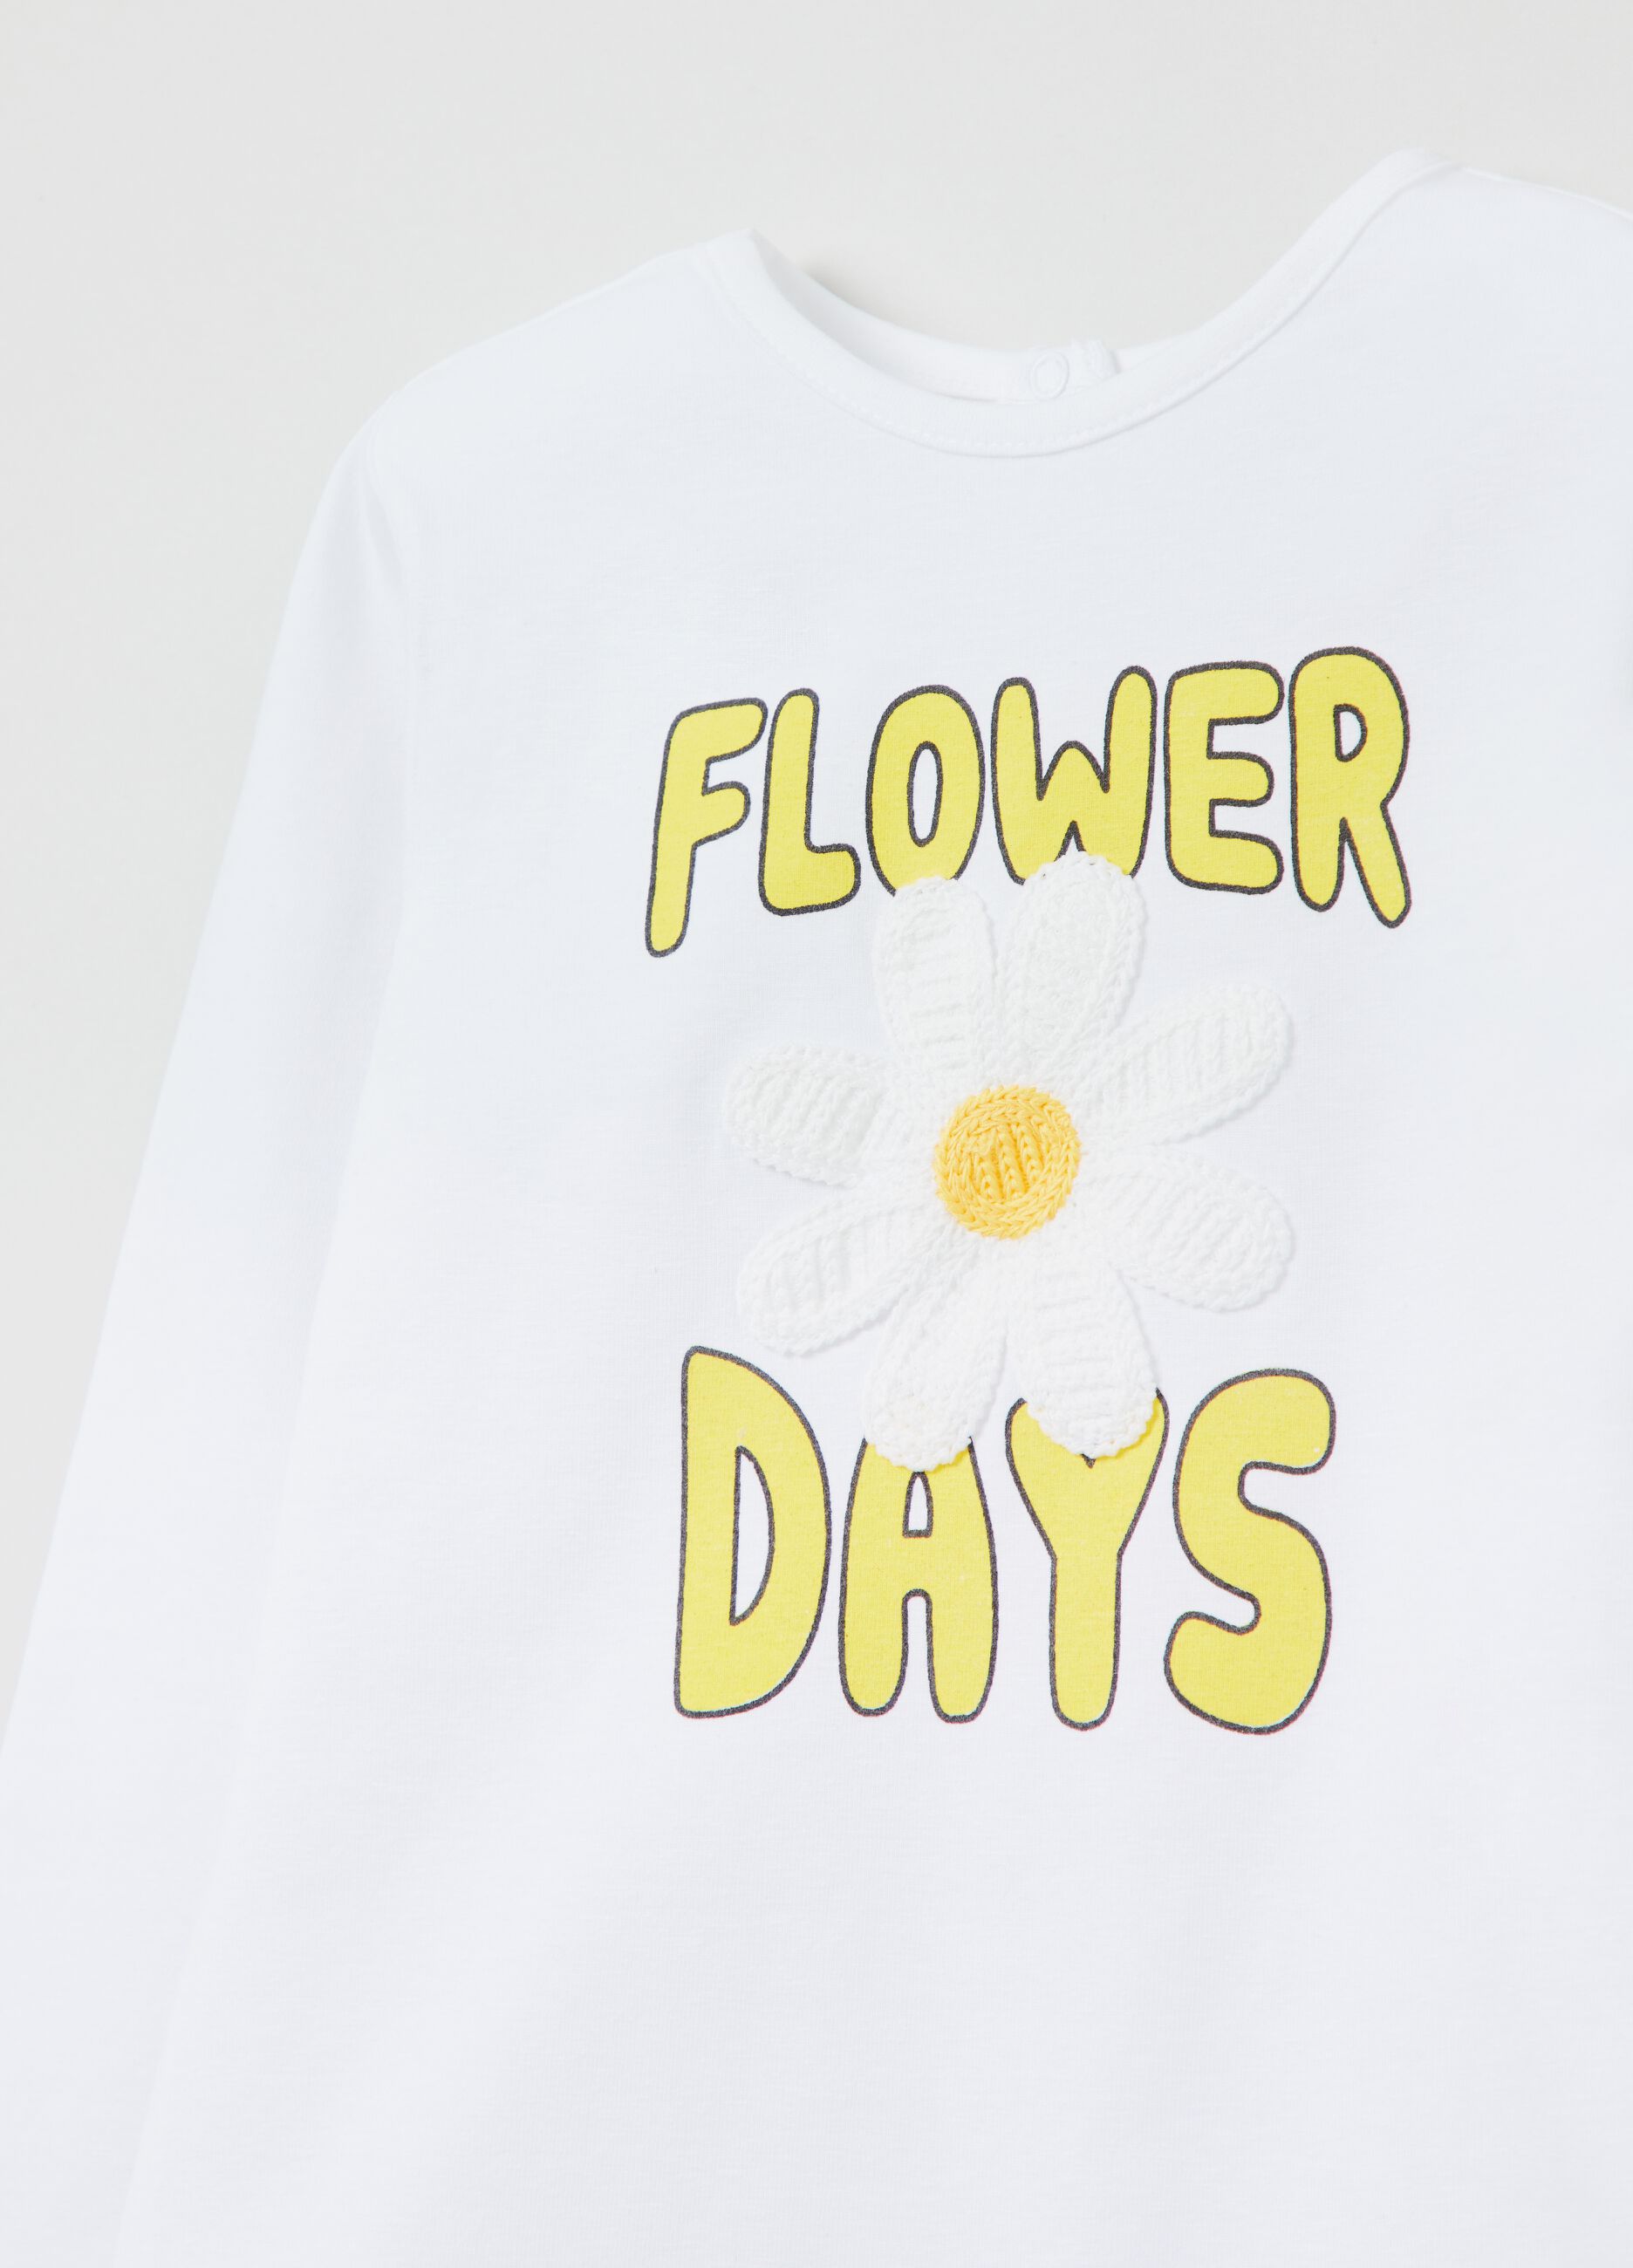 Long-sleeved T-shirt with crocheted flower